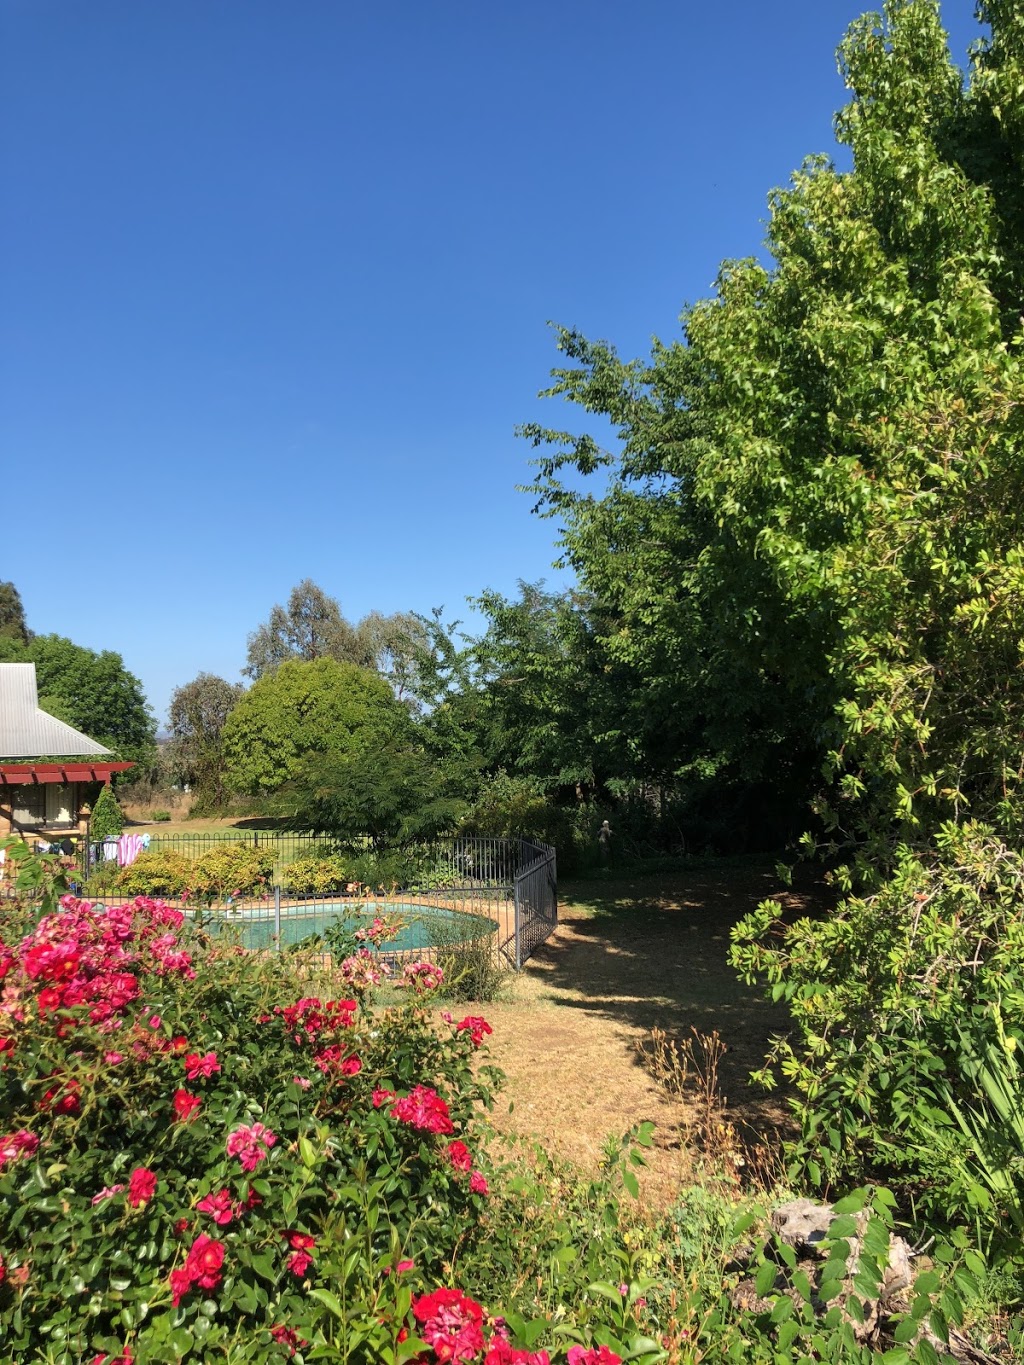 The Country Cottage Gardens | park | 137 Barraba Station Rd, Barraba NSW 2347, Australia | 0487306048 OR +61 487 306 048